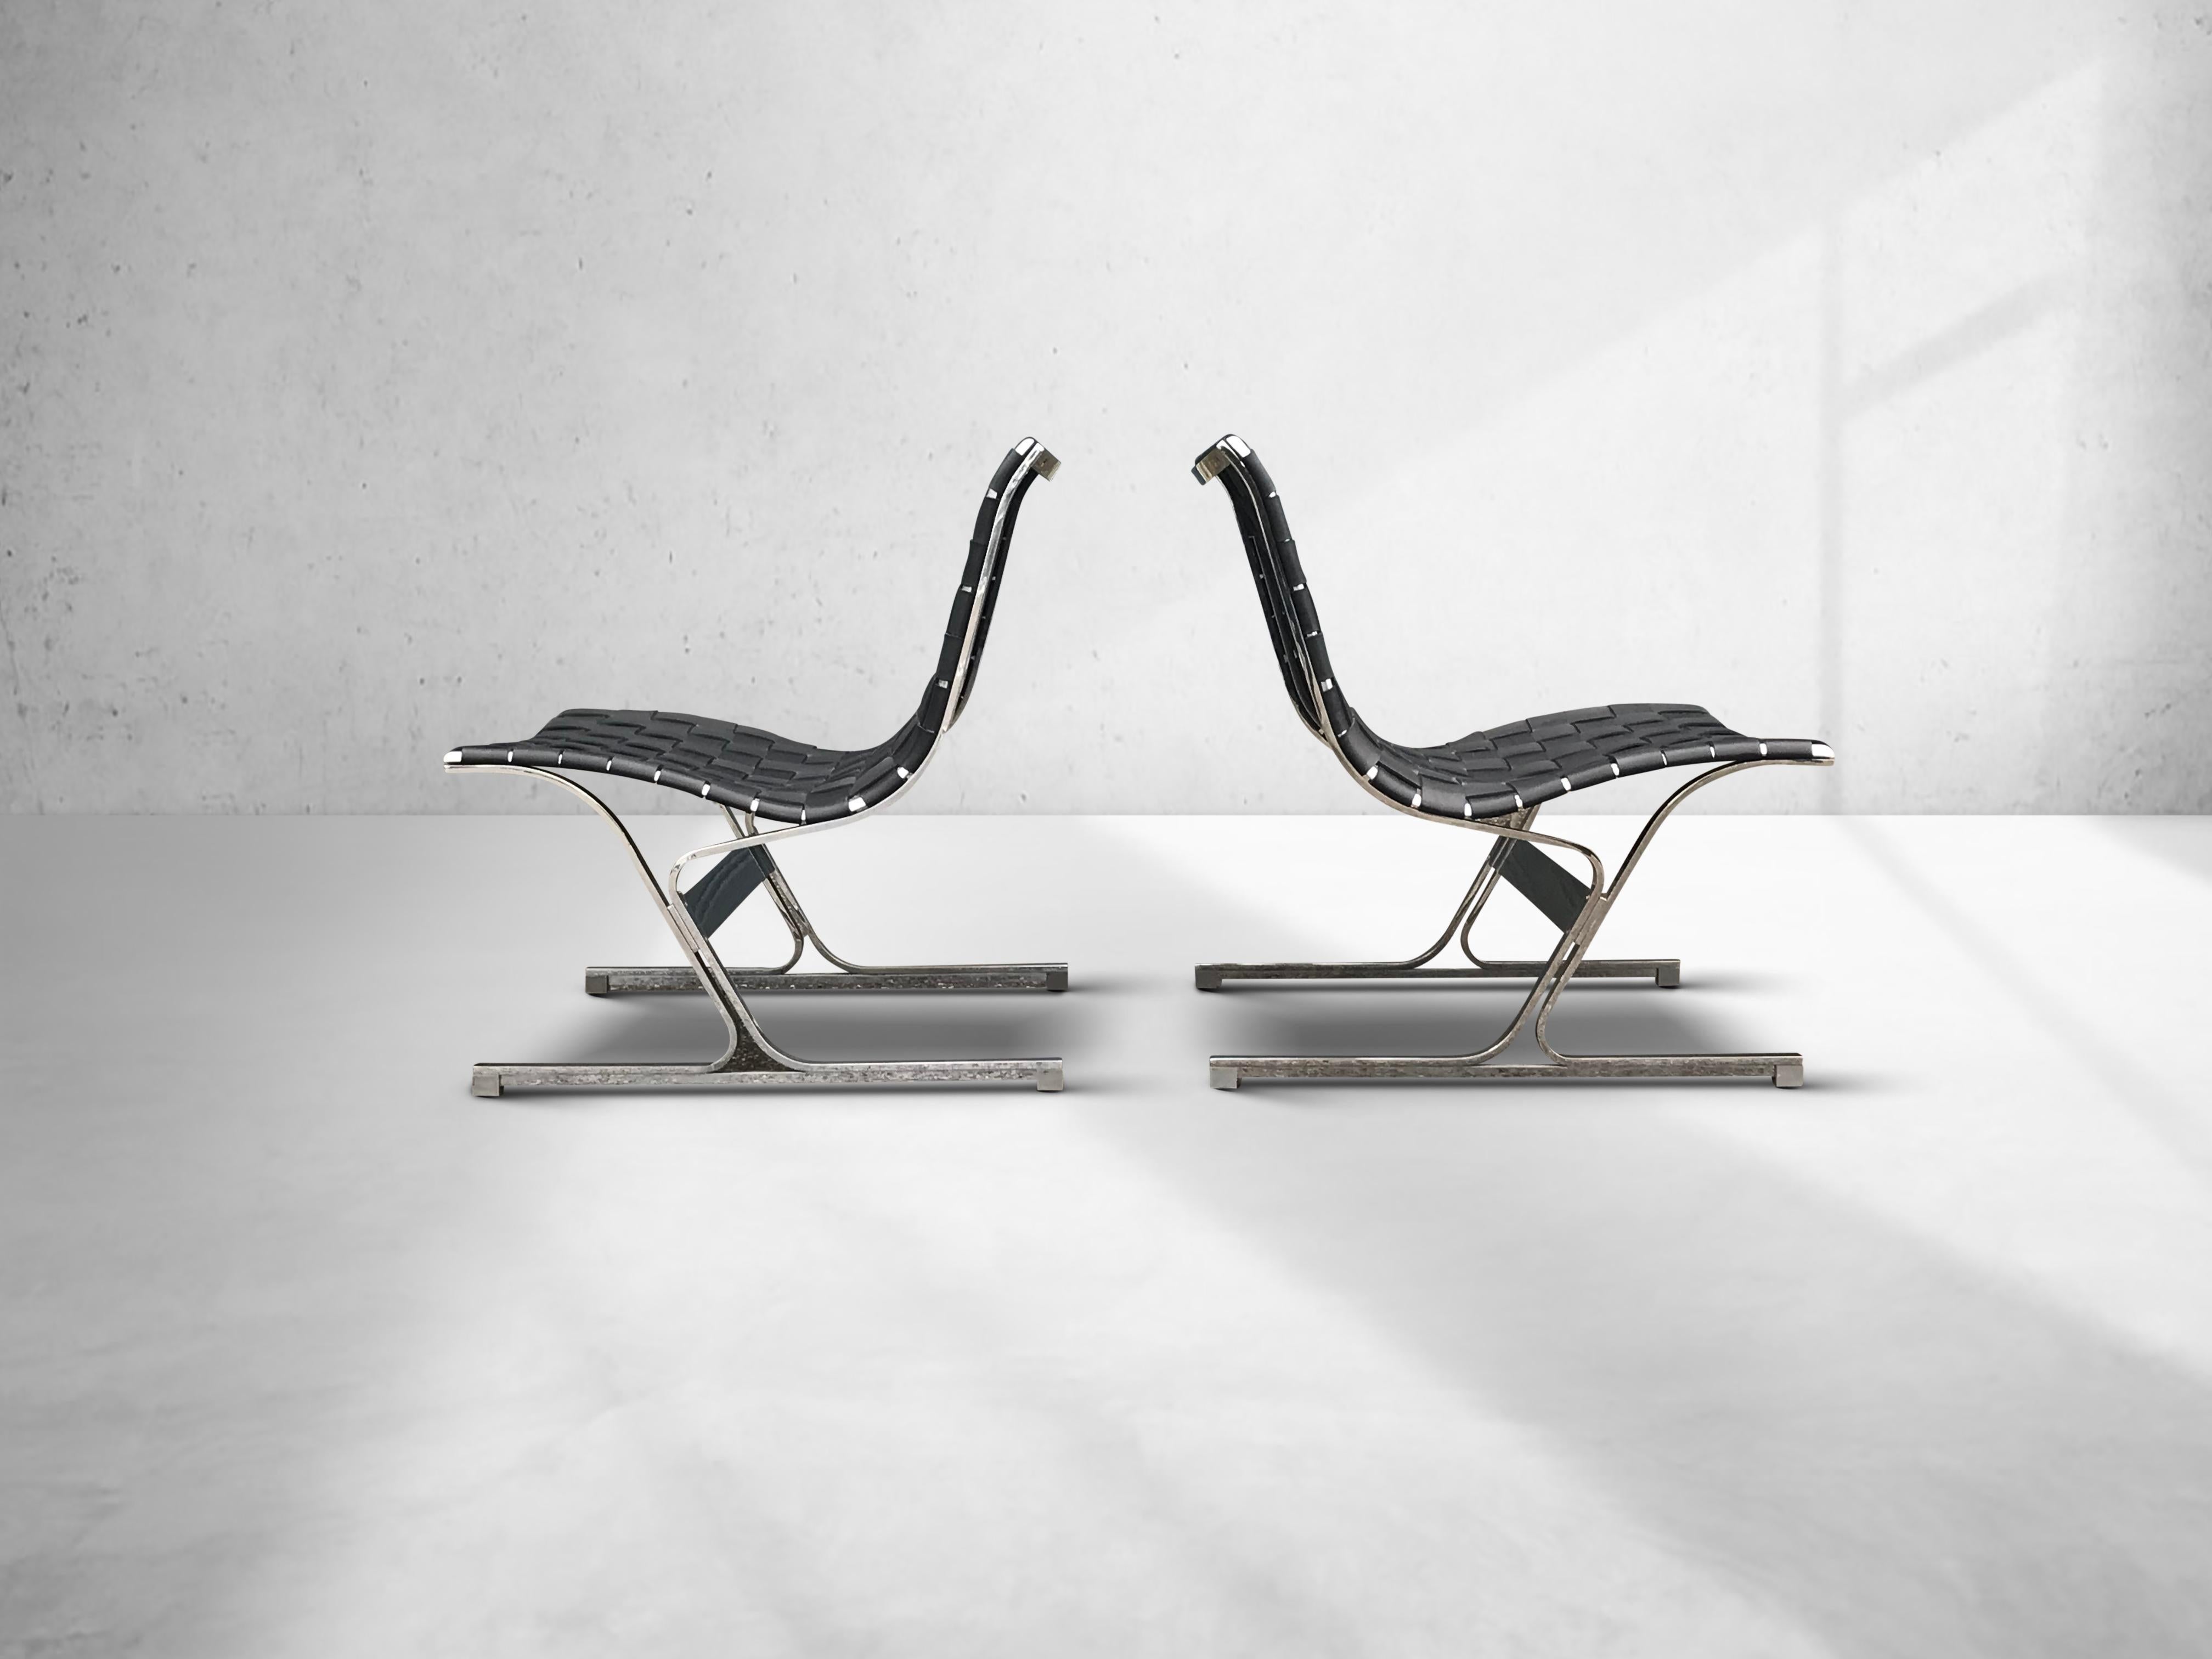 Steel PLR1 Luar lounge chair by Ross Littell for ICF De Padova Italy 1960s, set of 2 For Sale